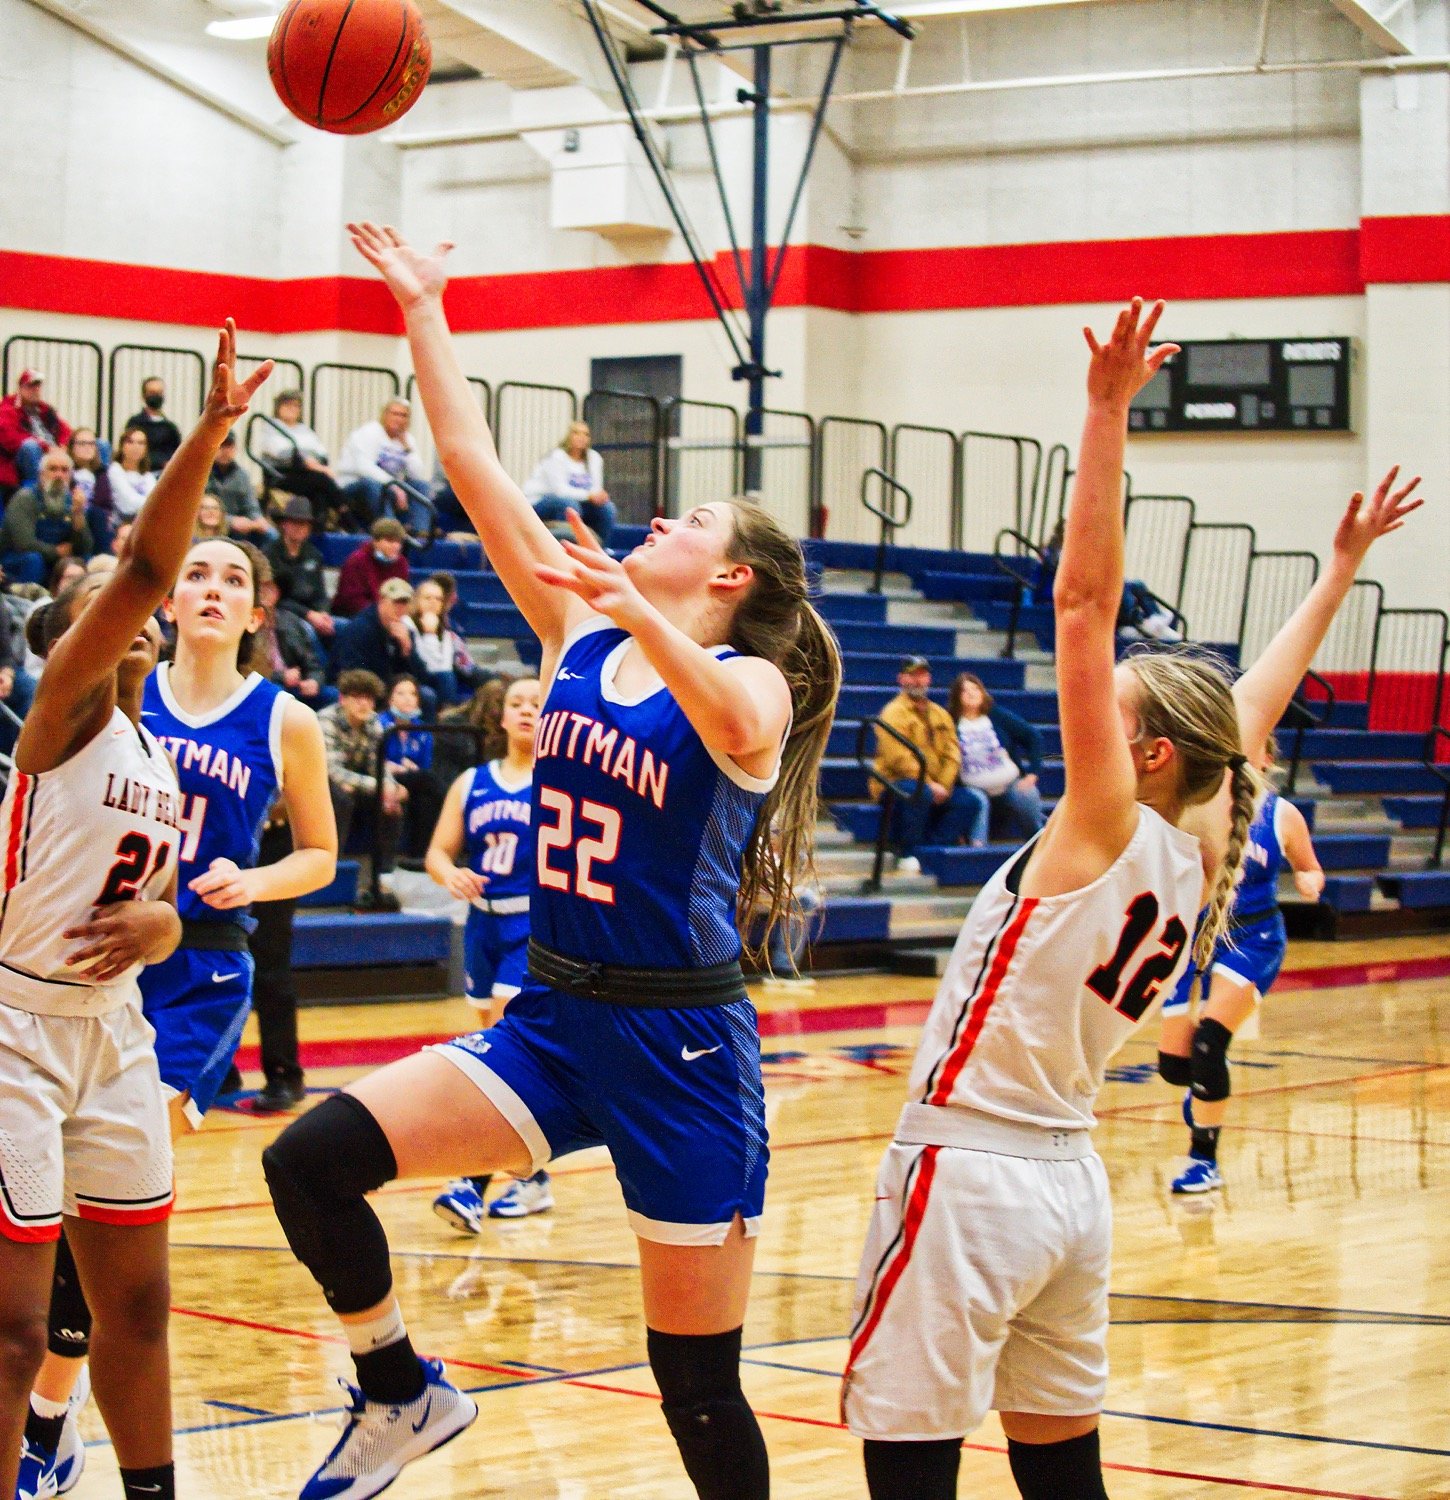 Madyson Pence helps the ball to the bucket. Pence was selected for first team all-district.